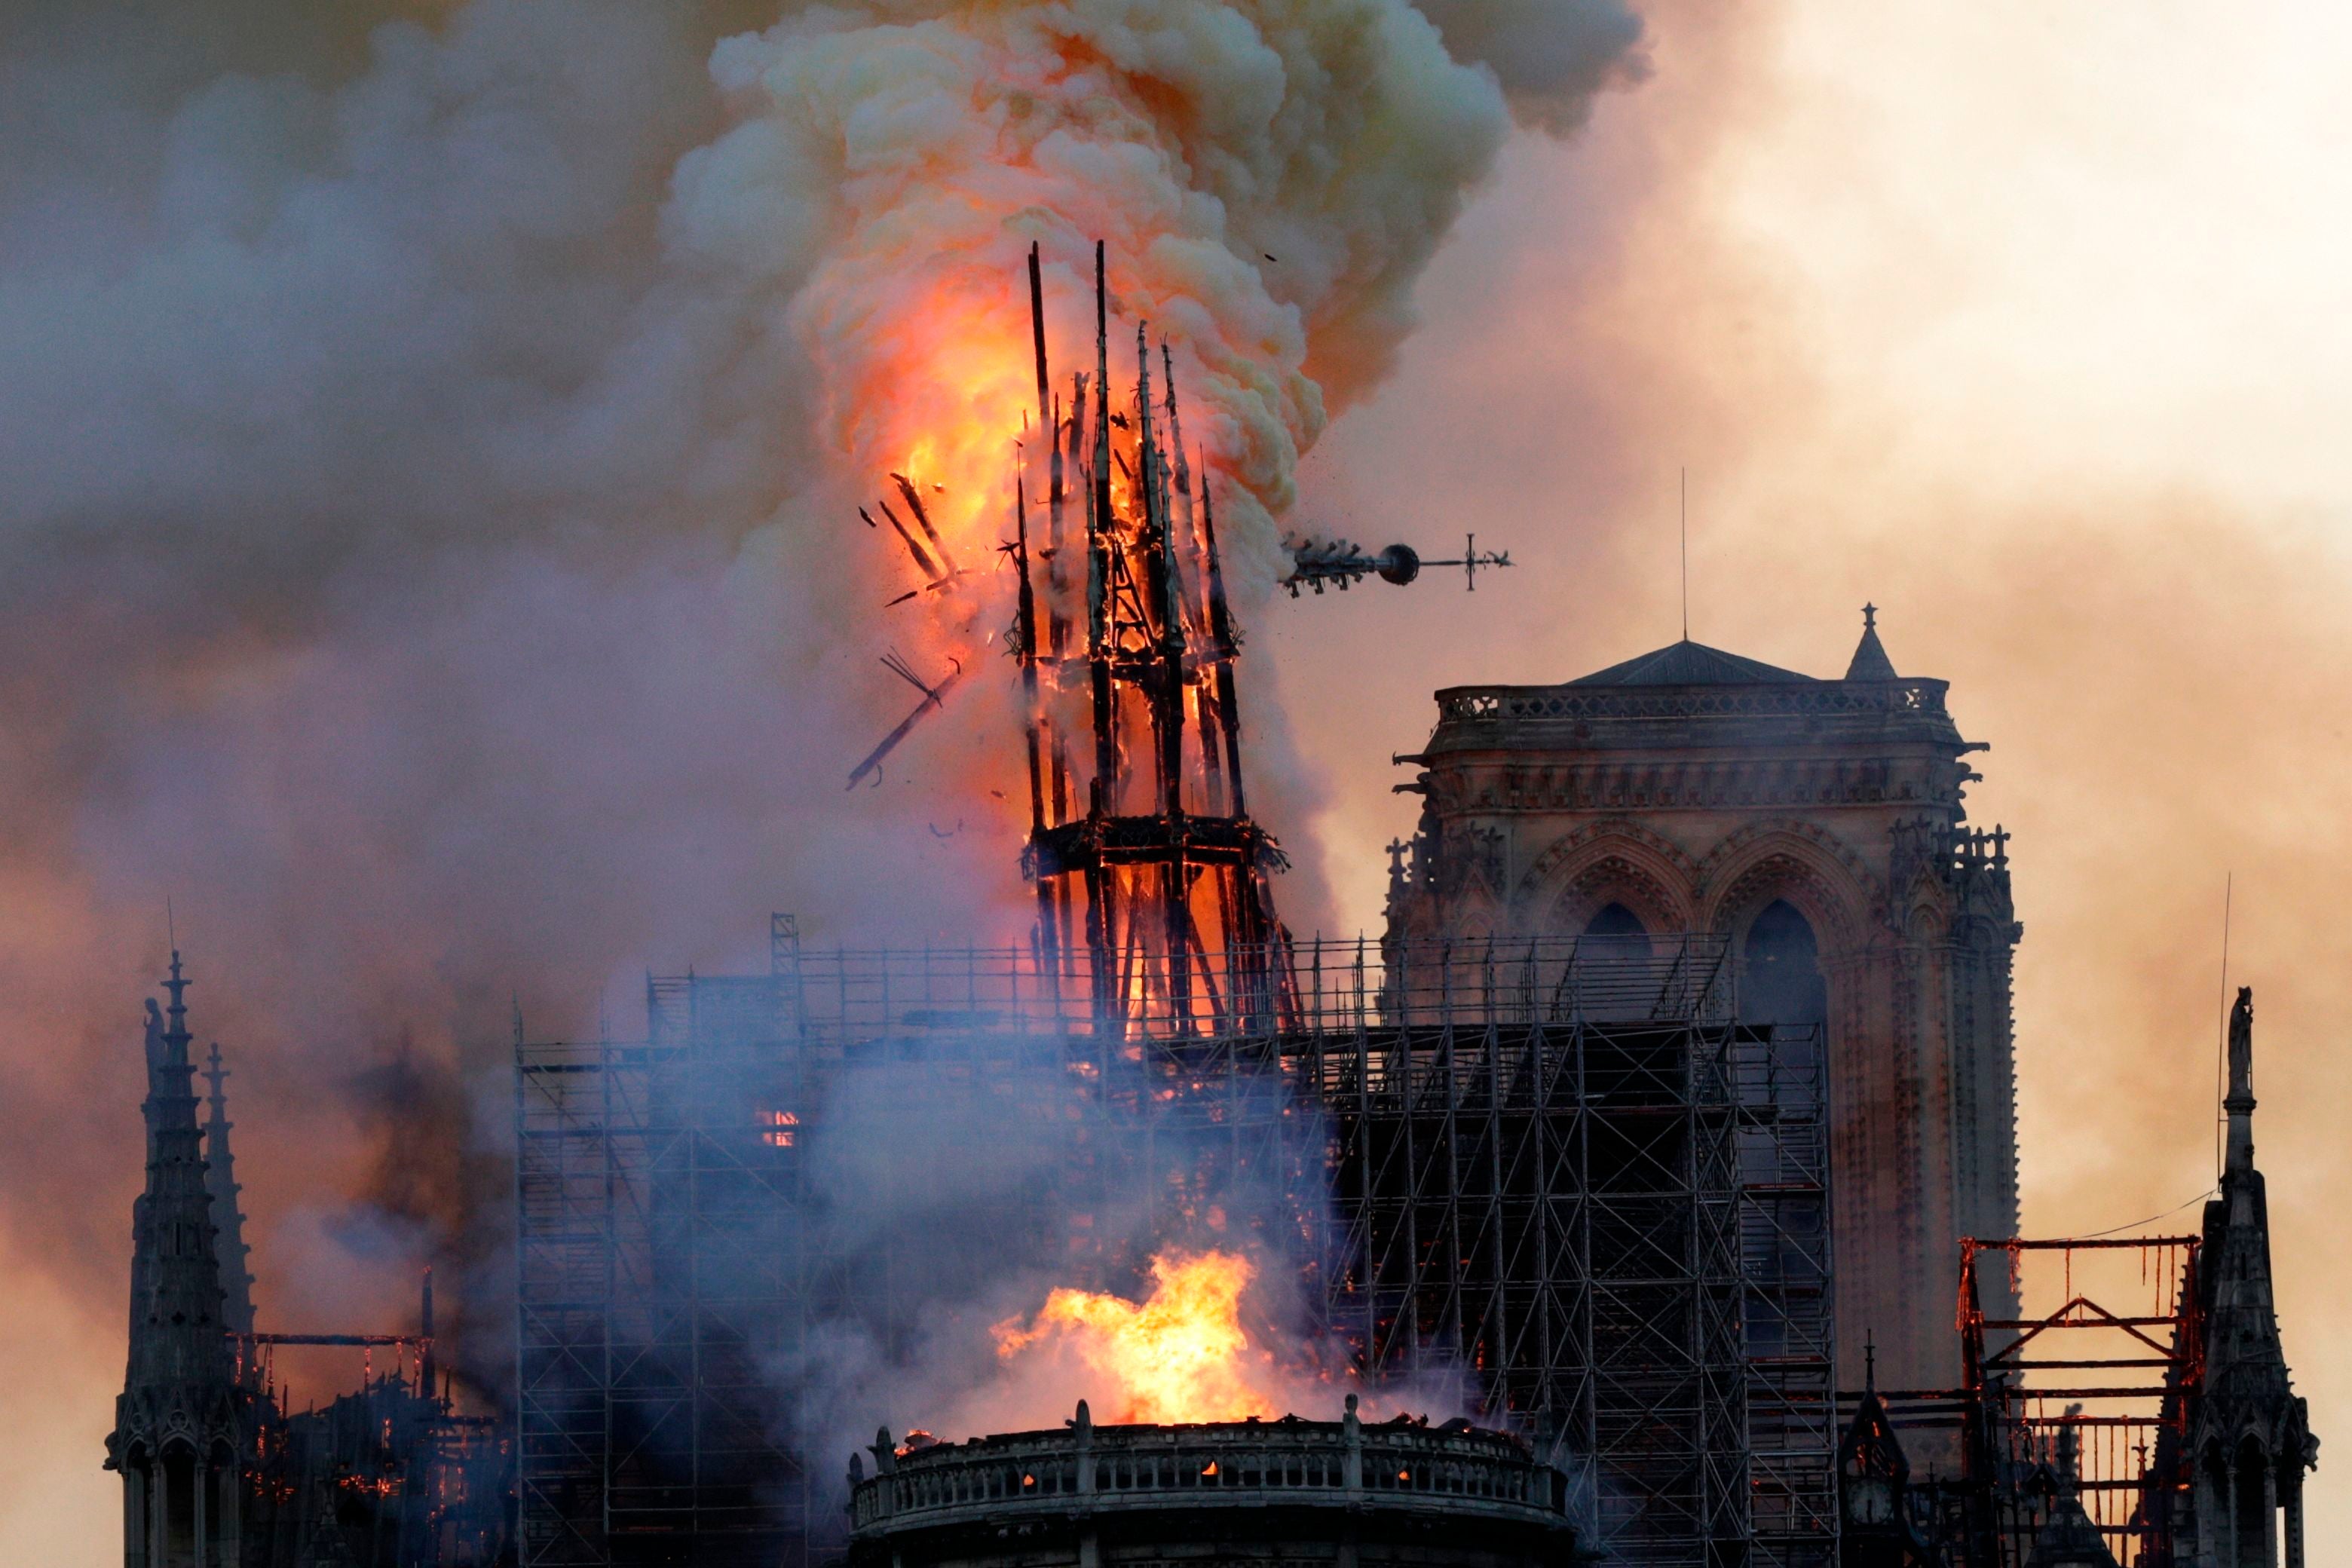 The collapse of Notre Dame's spire in a fire on April 15, 2019. (Photo: GEOFFROY VAN DER HASSELT/AFP, Getty Images)